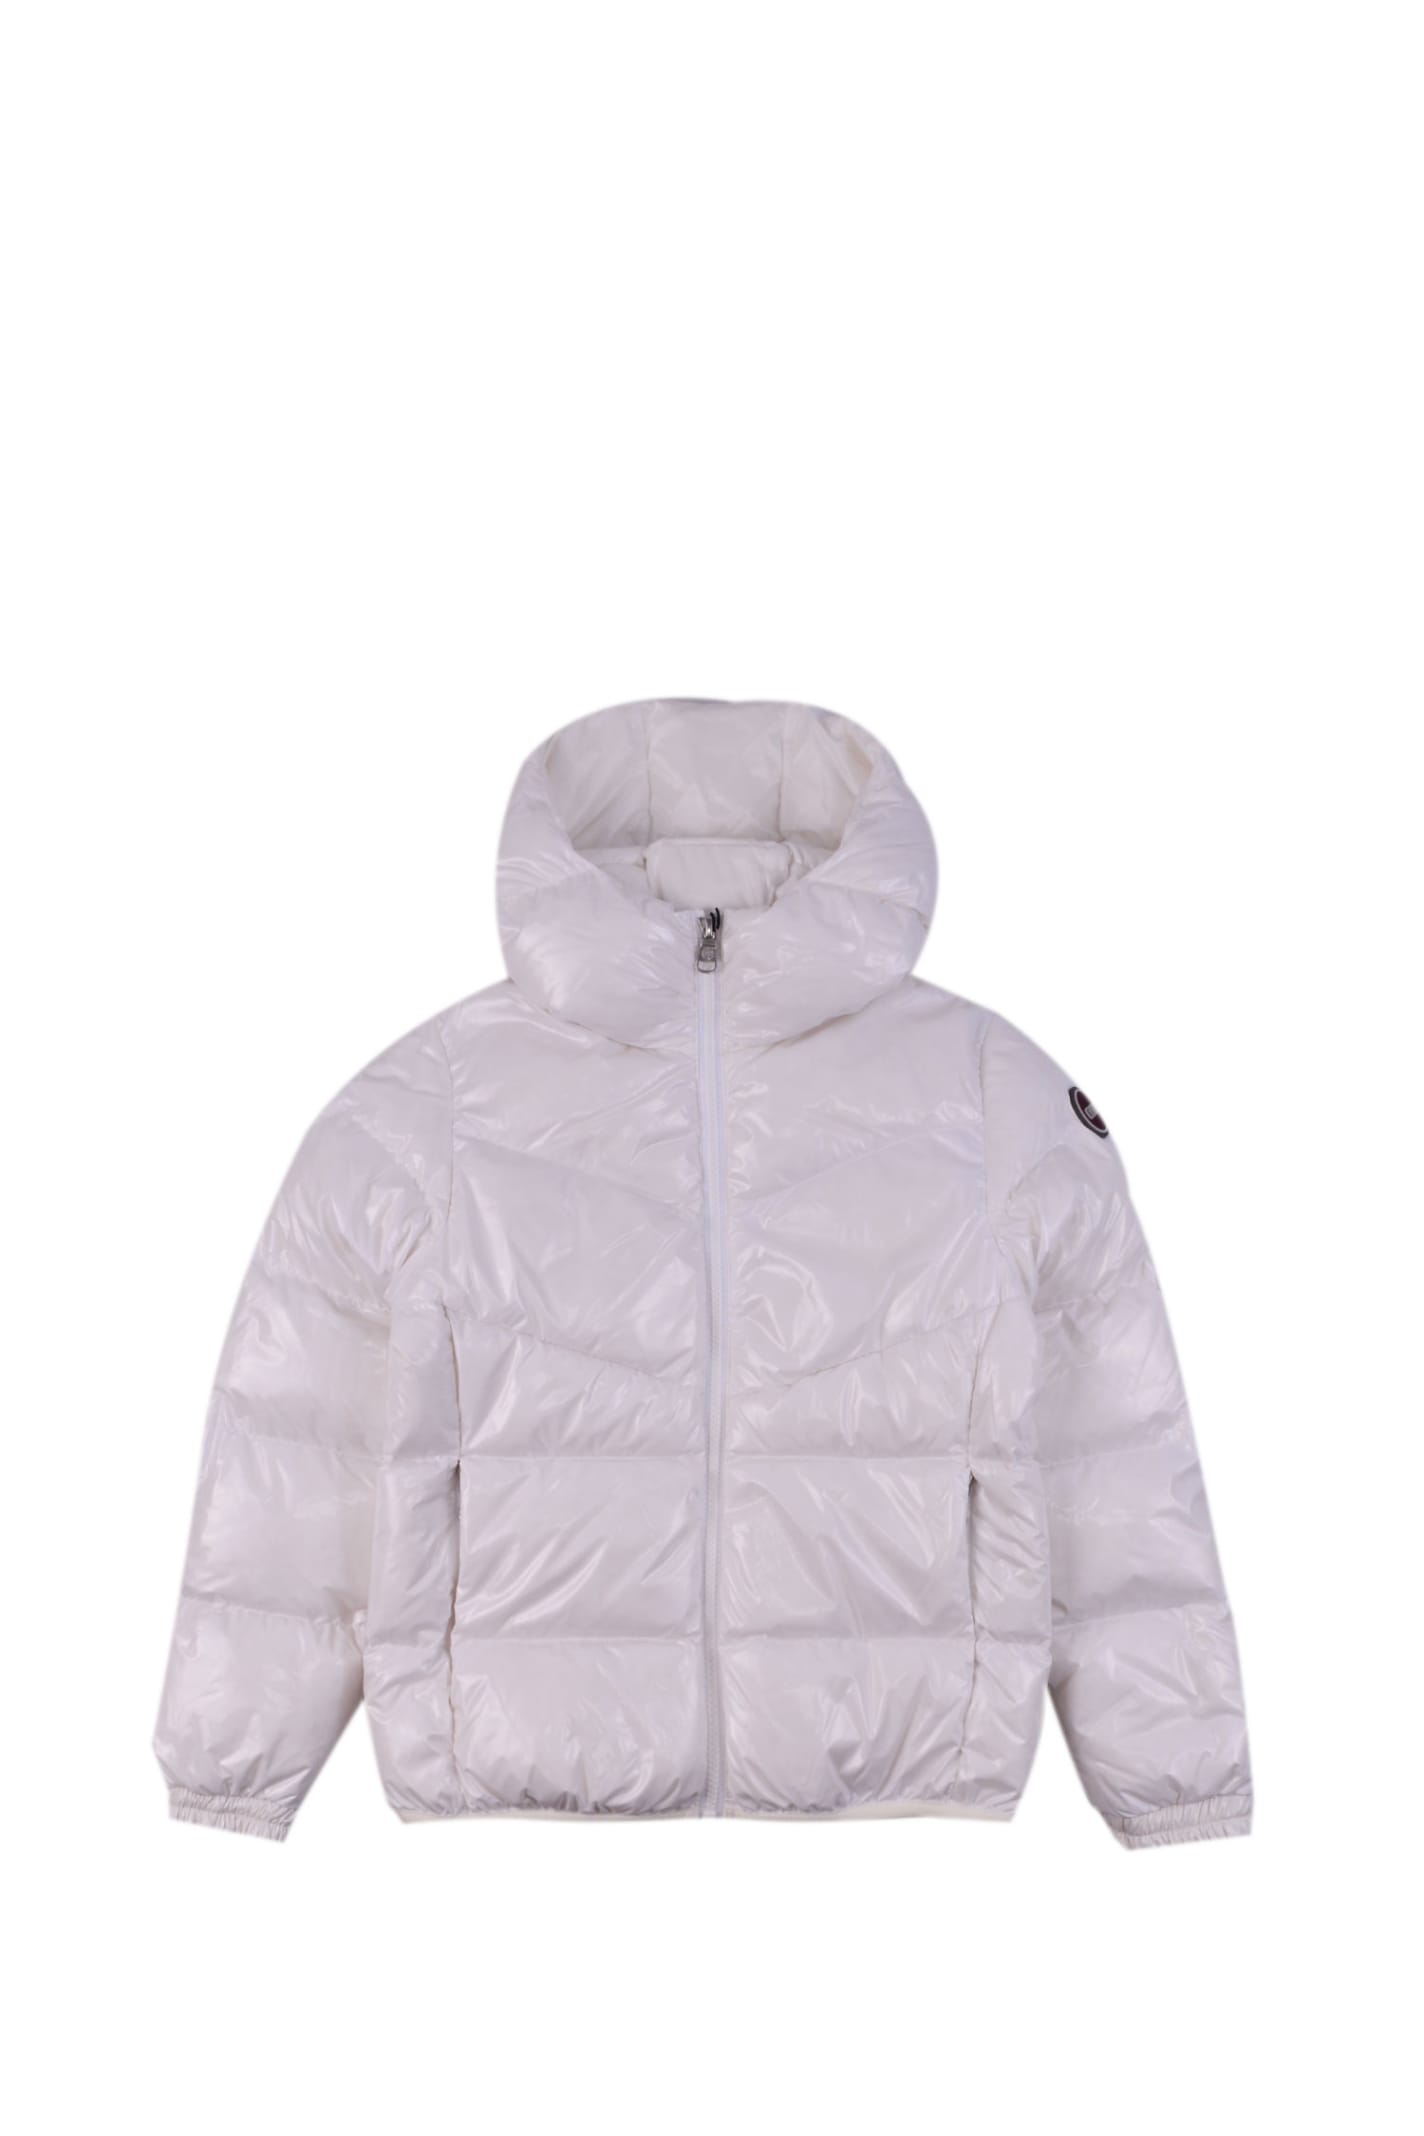 Colmar Kids' Down Jacket In Super Shiny Fabric In White